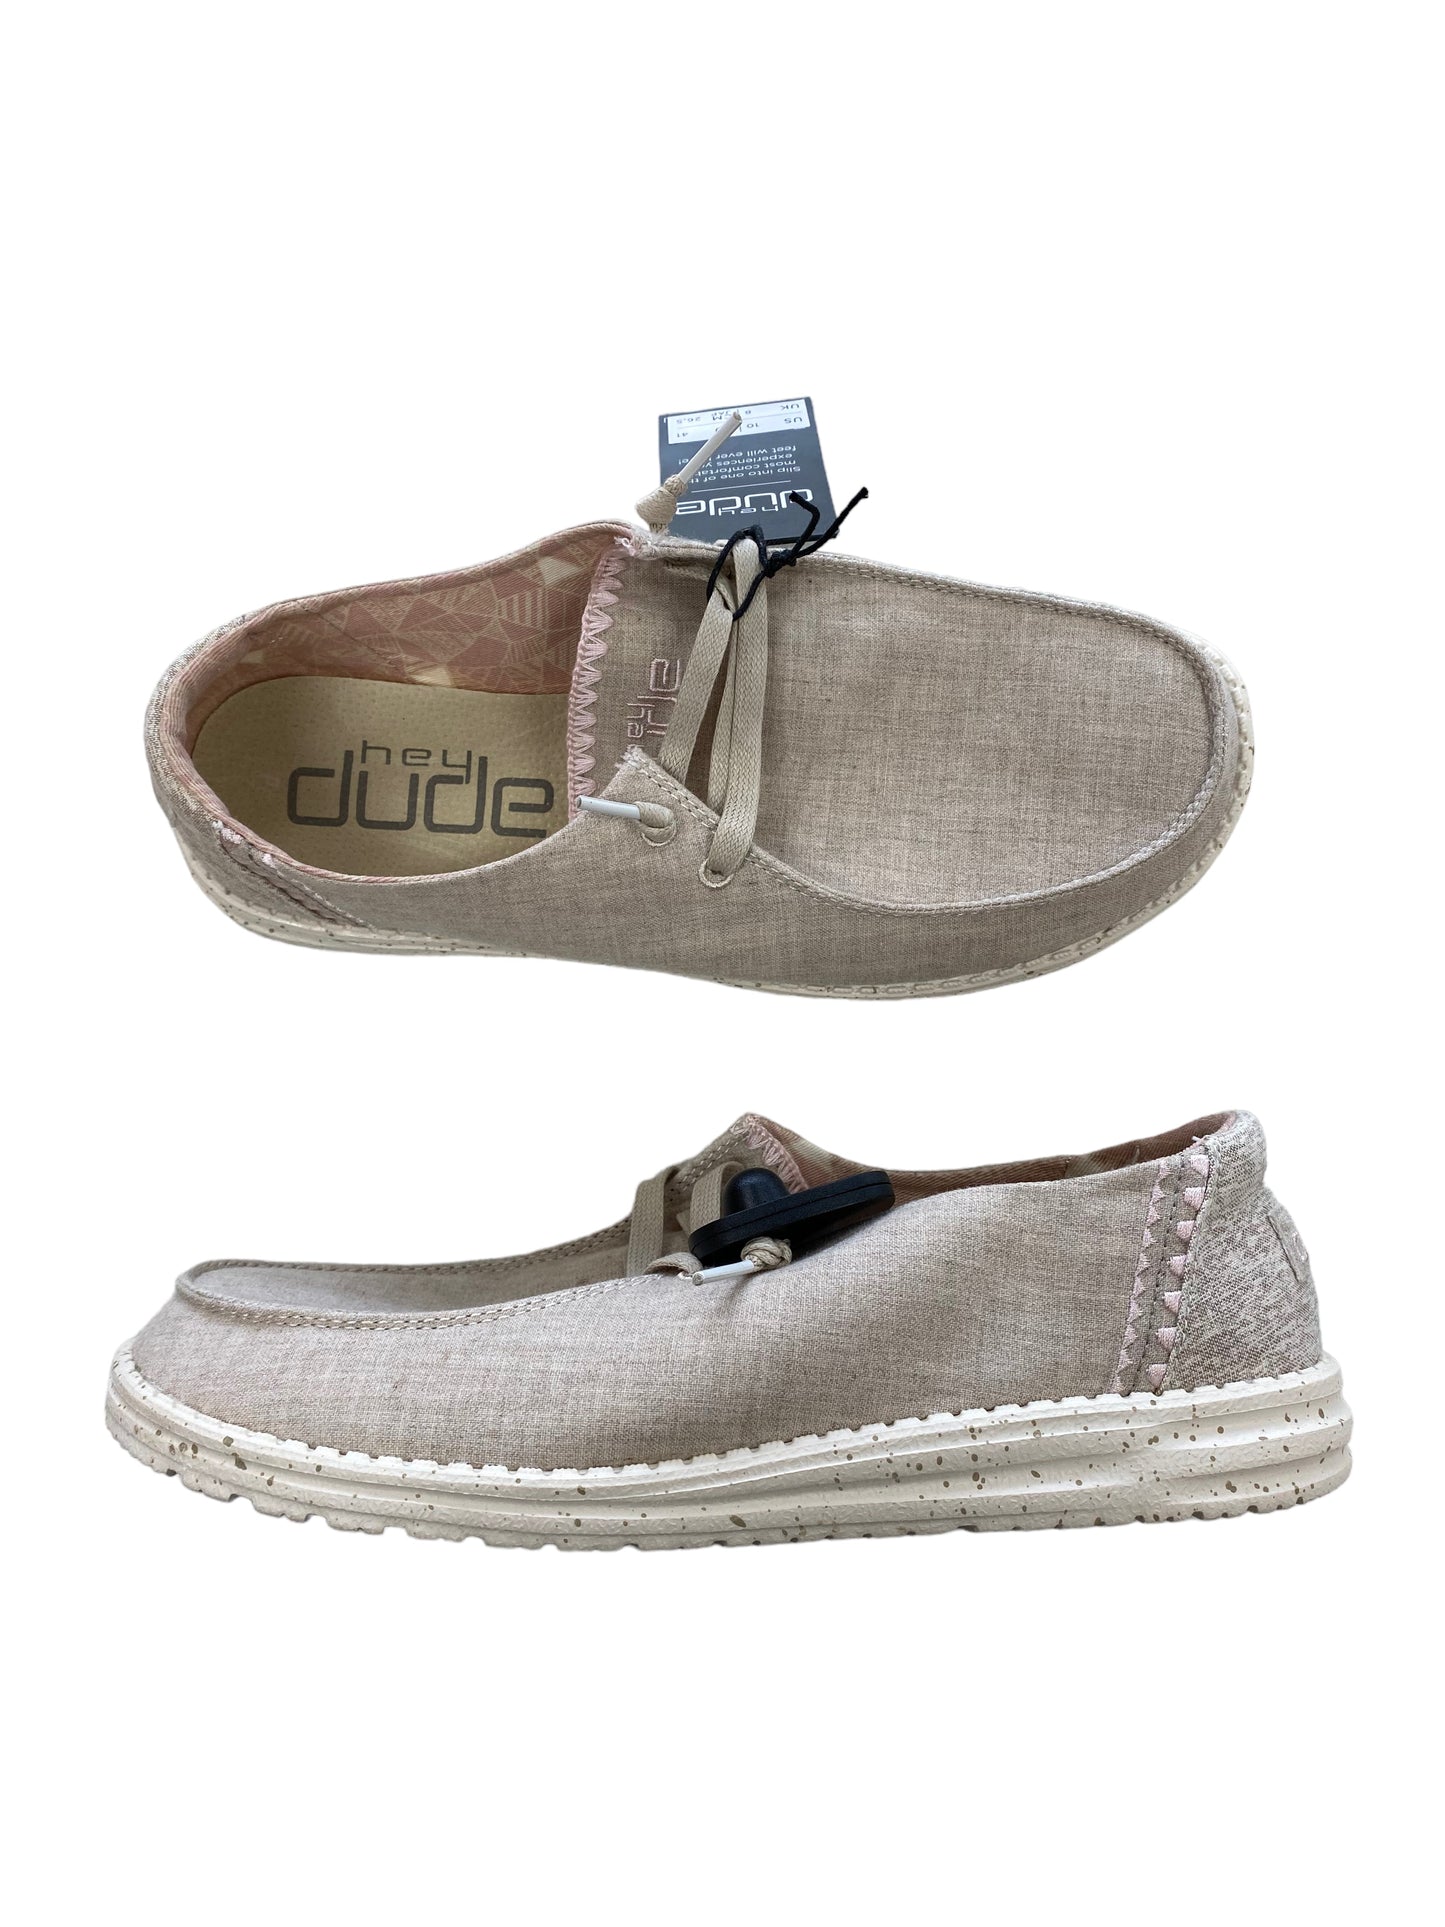 Cream Shoes Flats Hey Dude, Size 10